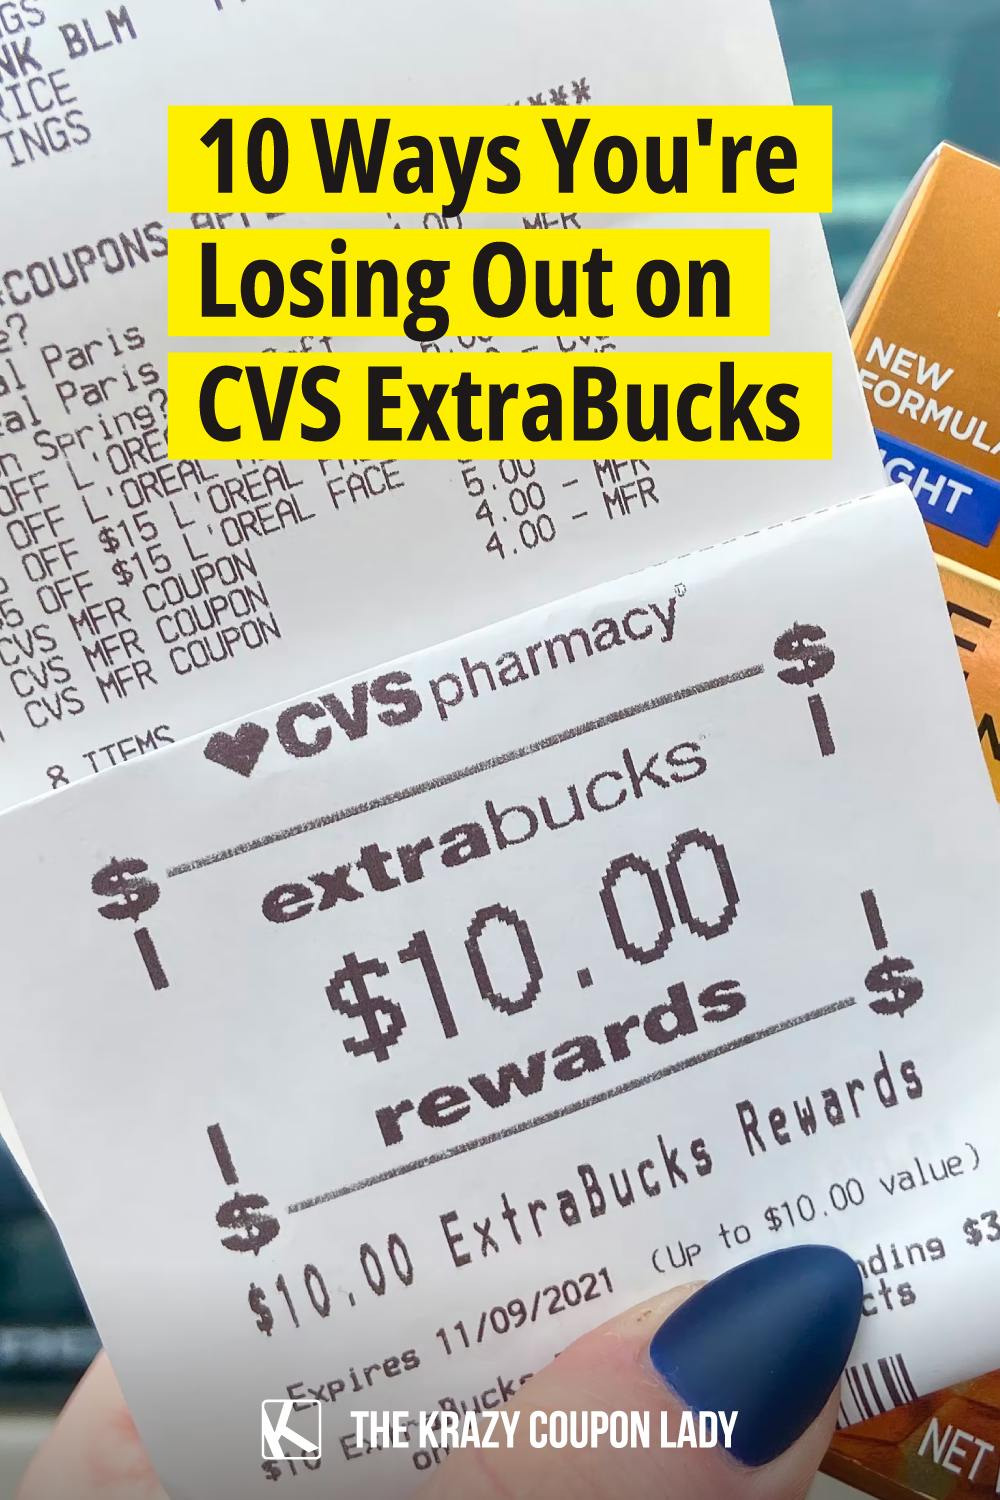 10 Ways You're Losing Out on CVS ExtraBucks